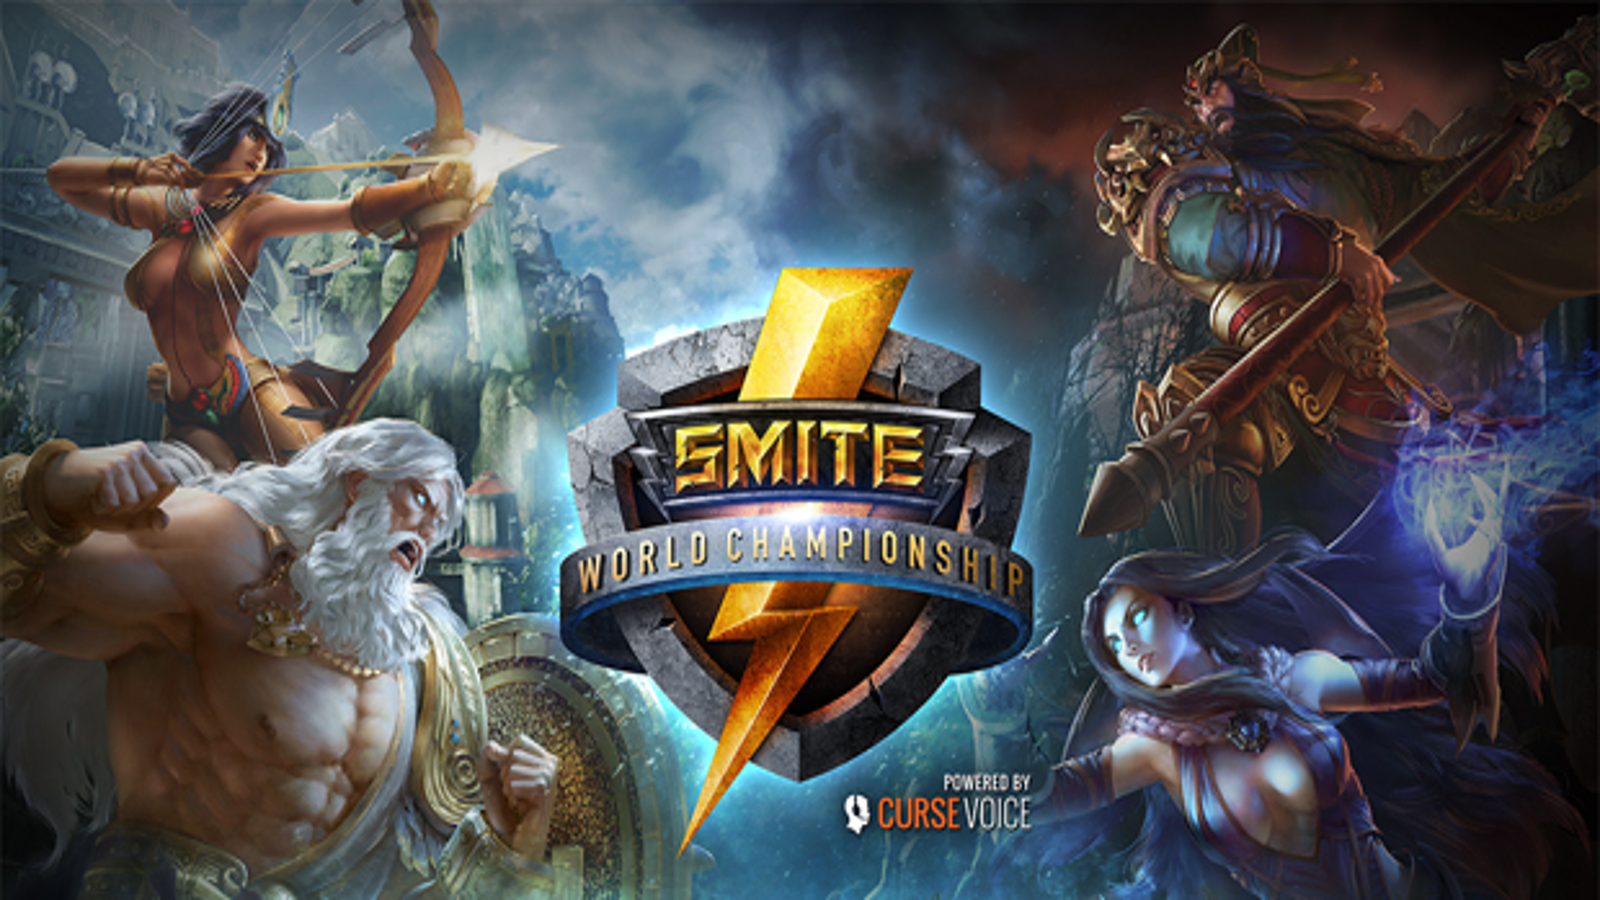 Prime Gaming loot for this month : r/Smite